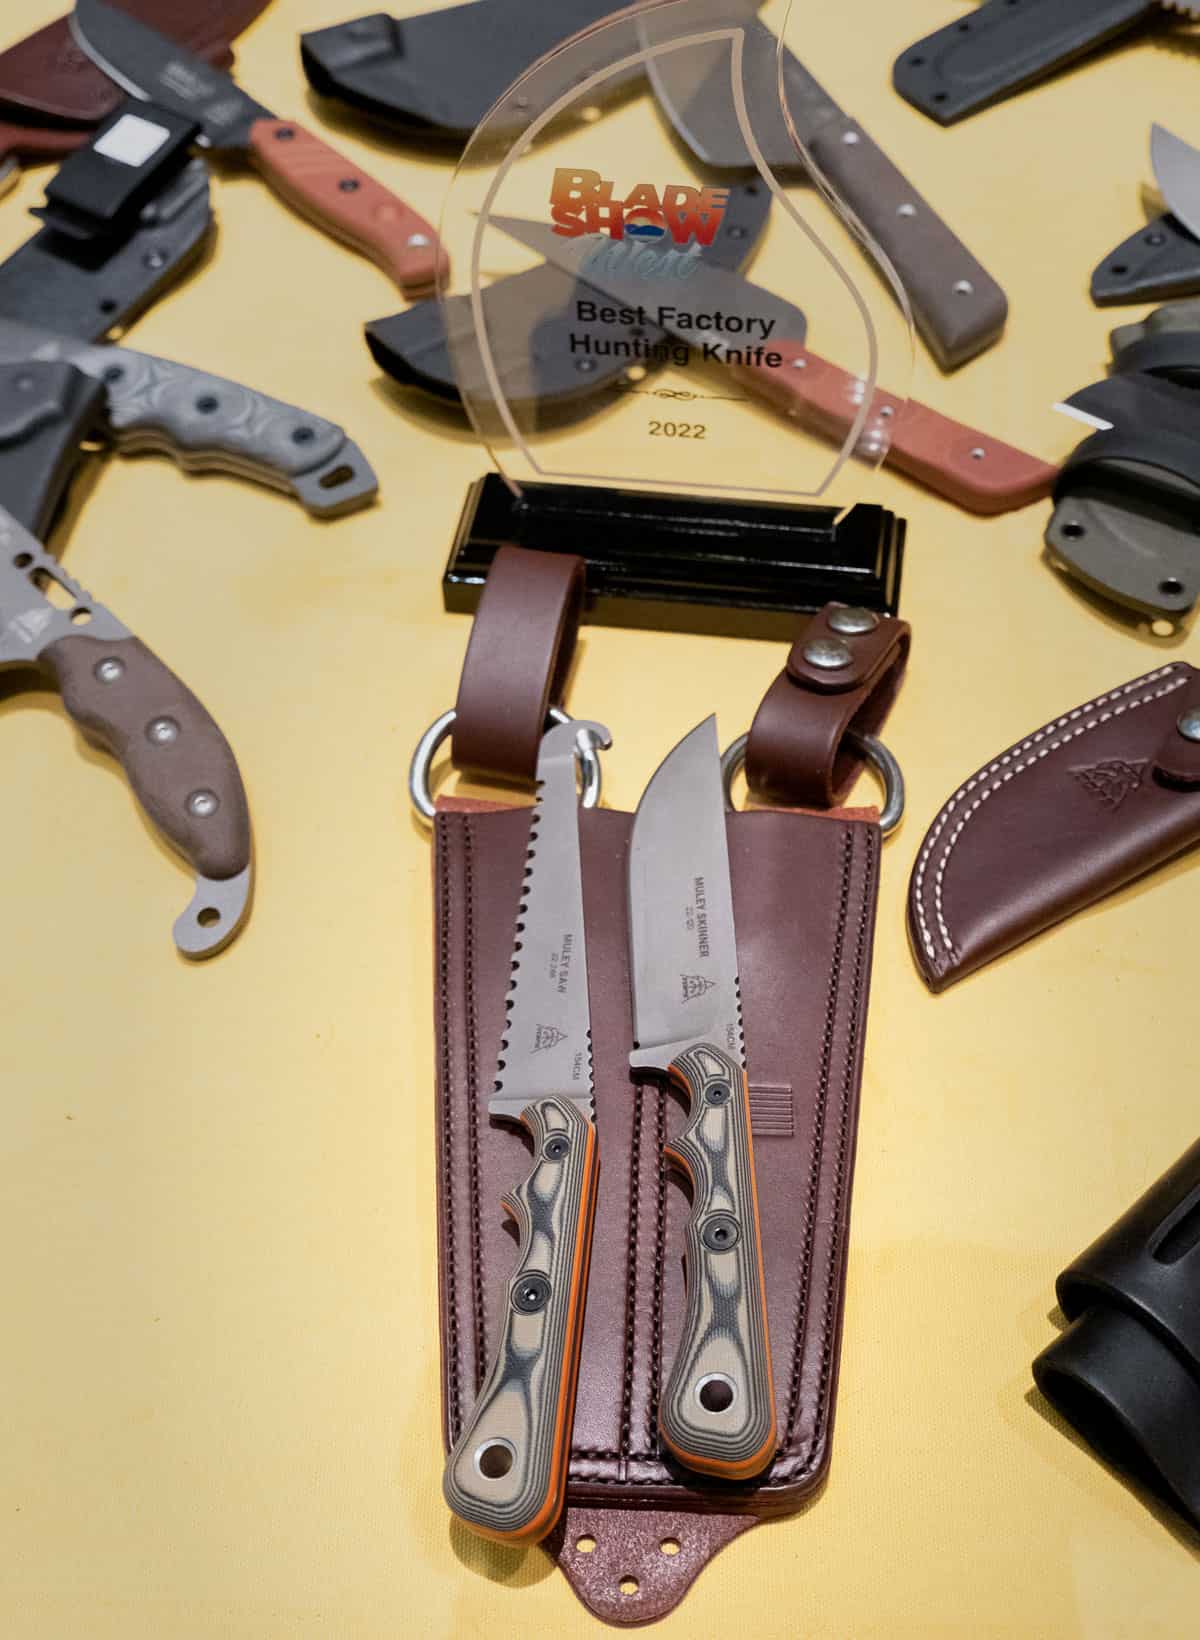 The winning Muley Skinner knife set from TOPS Knives